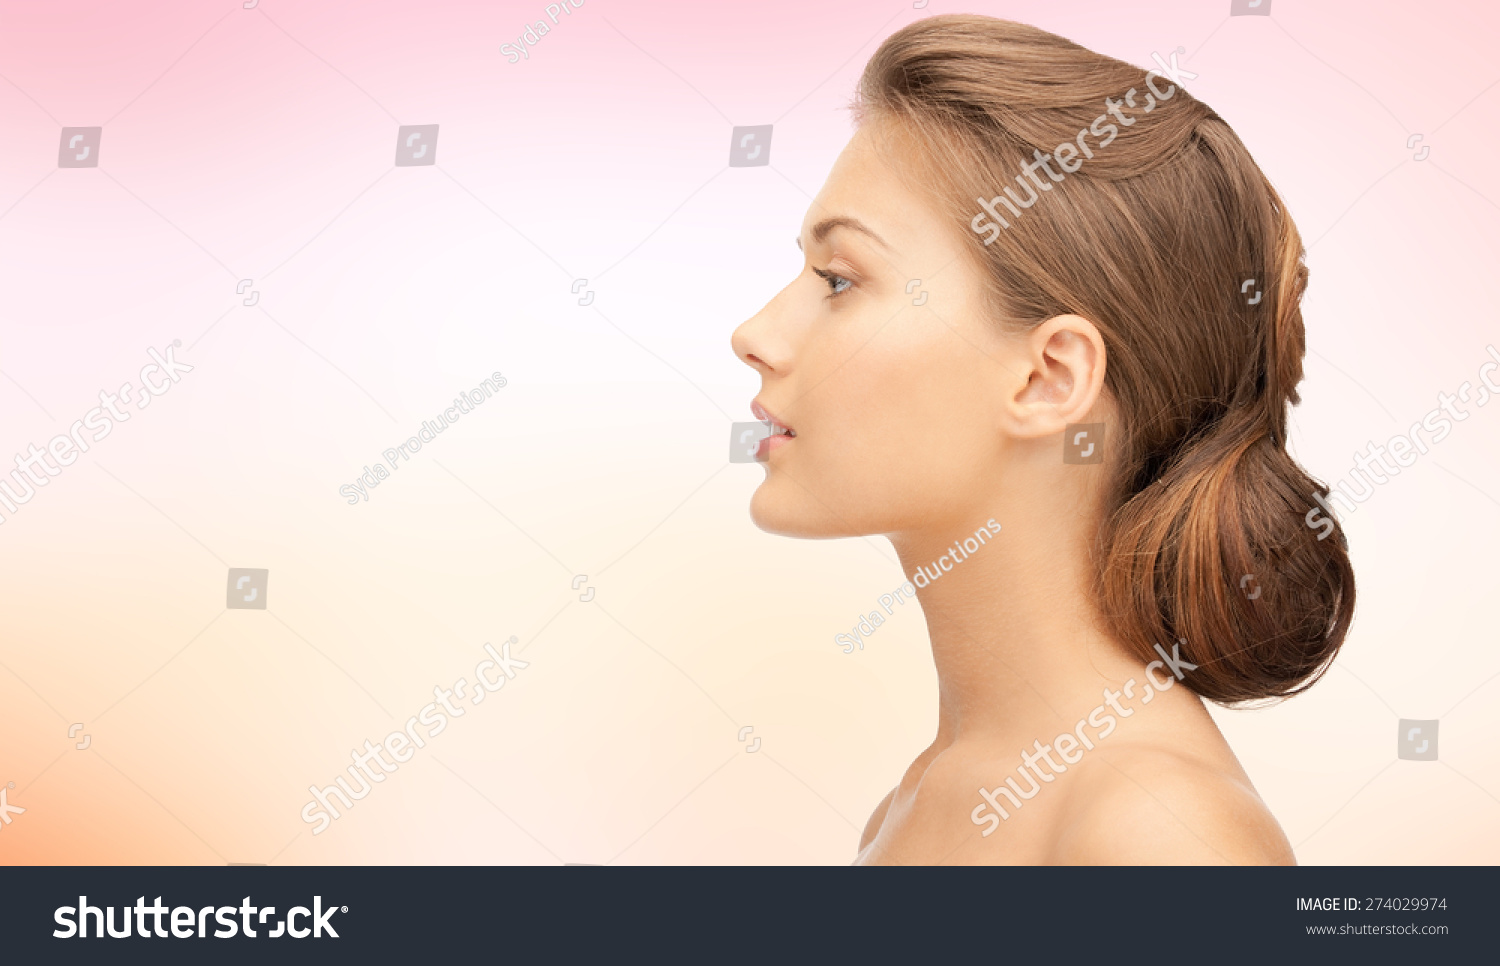 stock-photo-health-people-plastic-surgery-and-beauty-concept-beautiful-young-woman-face-over-pink-background-274029974.jpg